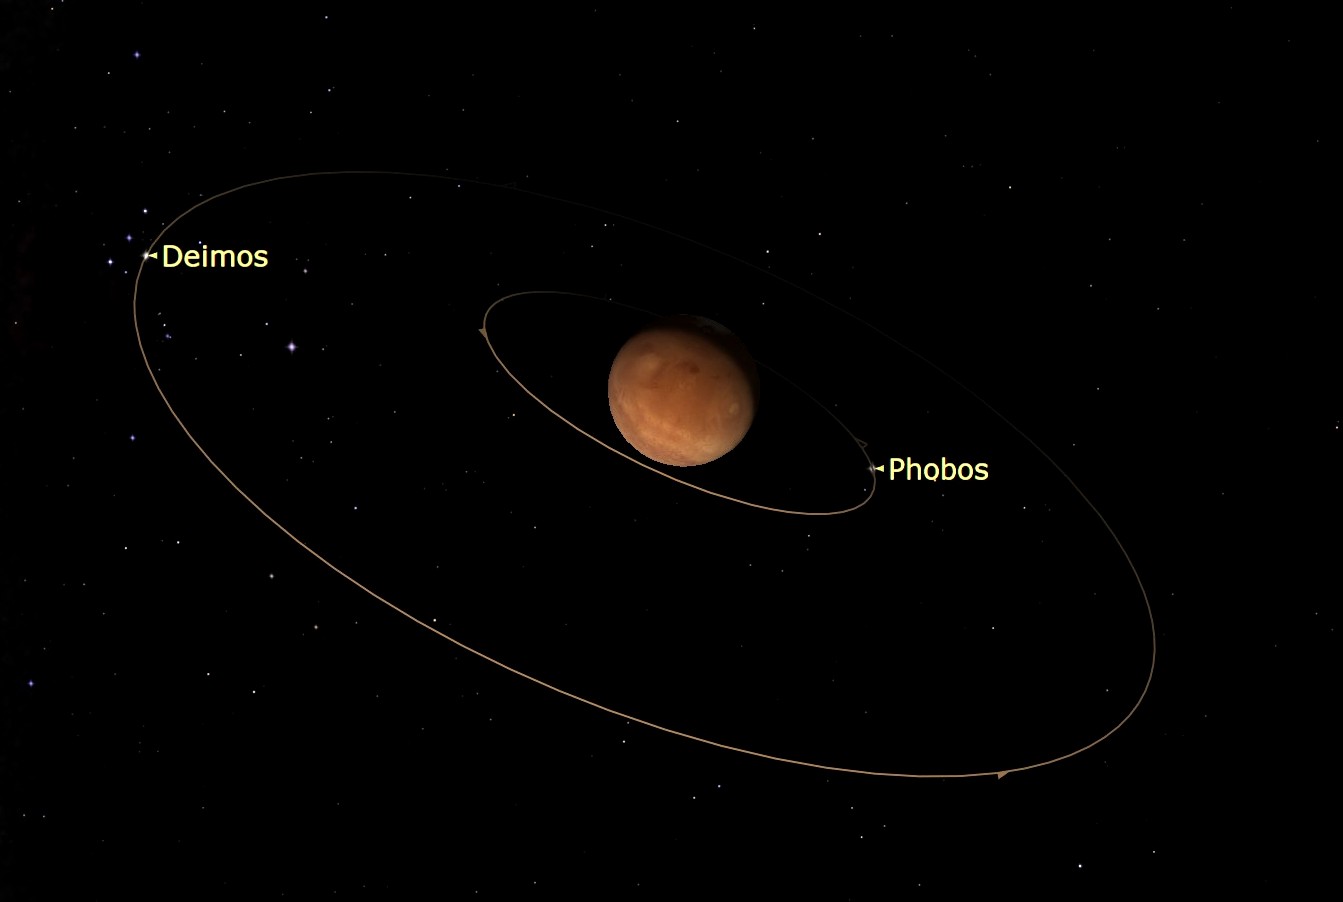 Graphic showing rusty-red Mars at the center and its two moons Phobos and Deimos are orbiting around it.